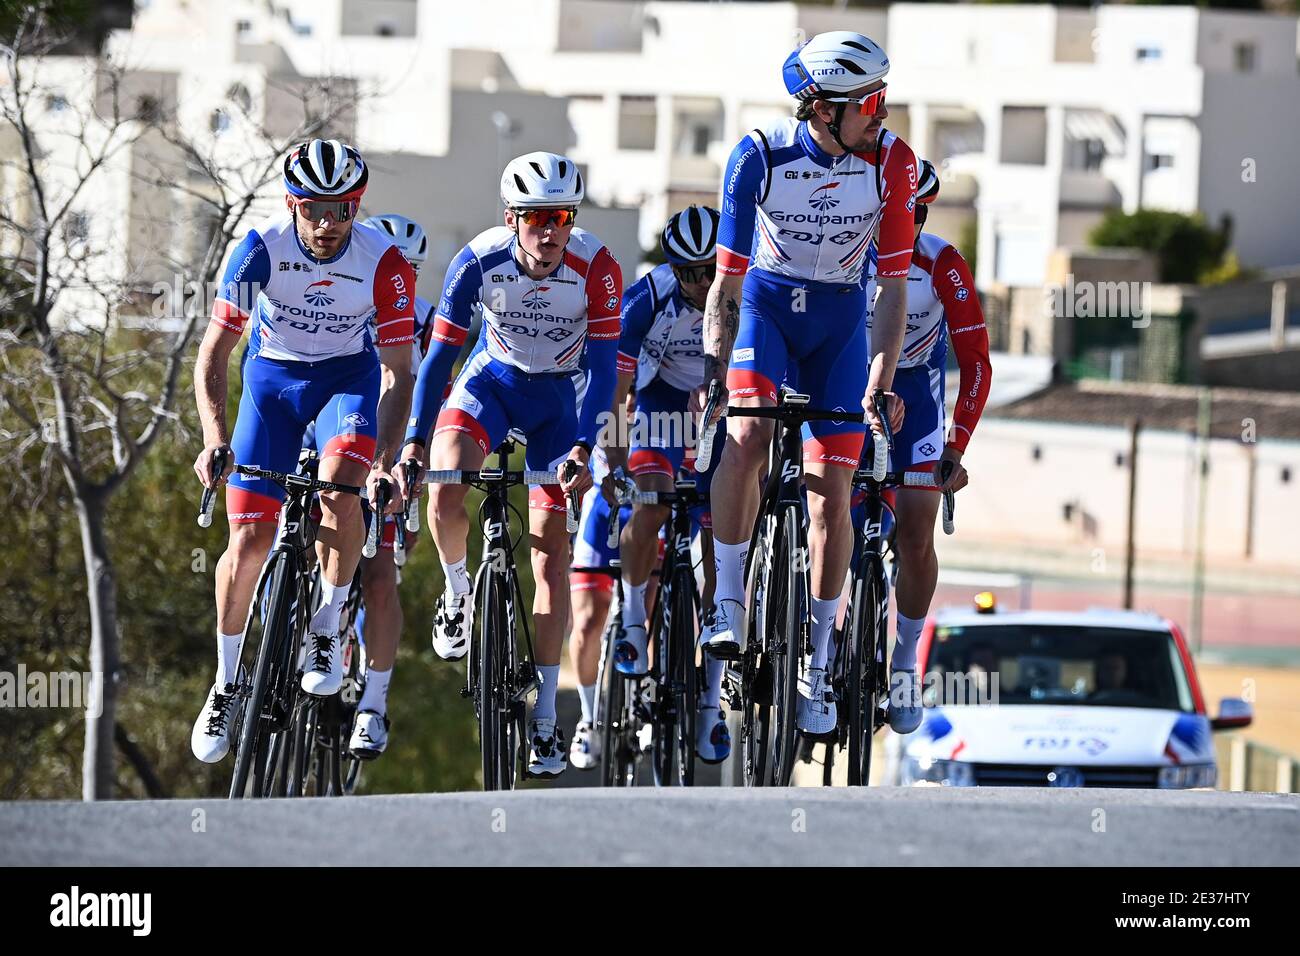 Groupama FDJ riders pictured in action during the Groupama Fdj cycling team  stage in Spain, Sunday 17 January 2021. BELGA PHOTO DAVID STOCKMAN Stock  Photo - Alamy